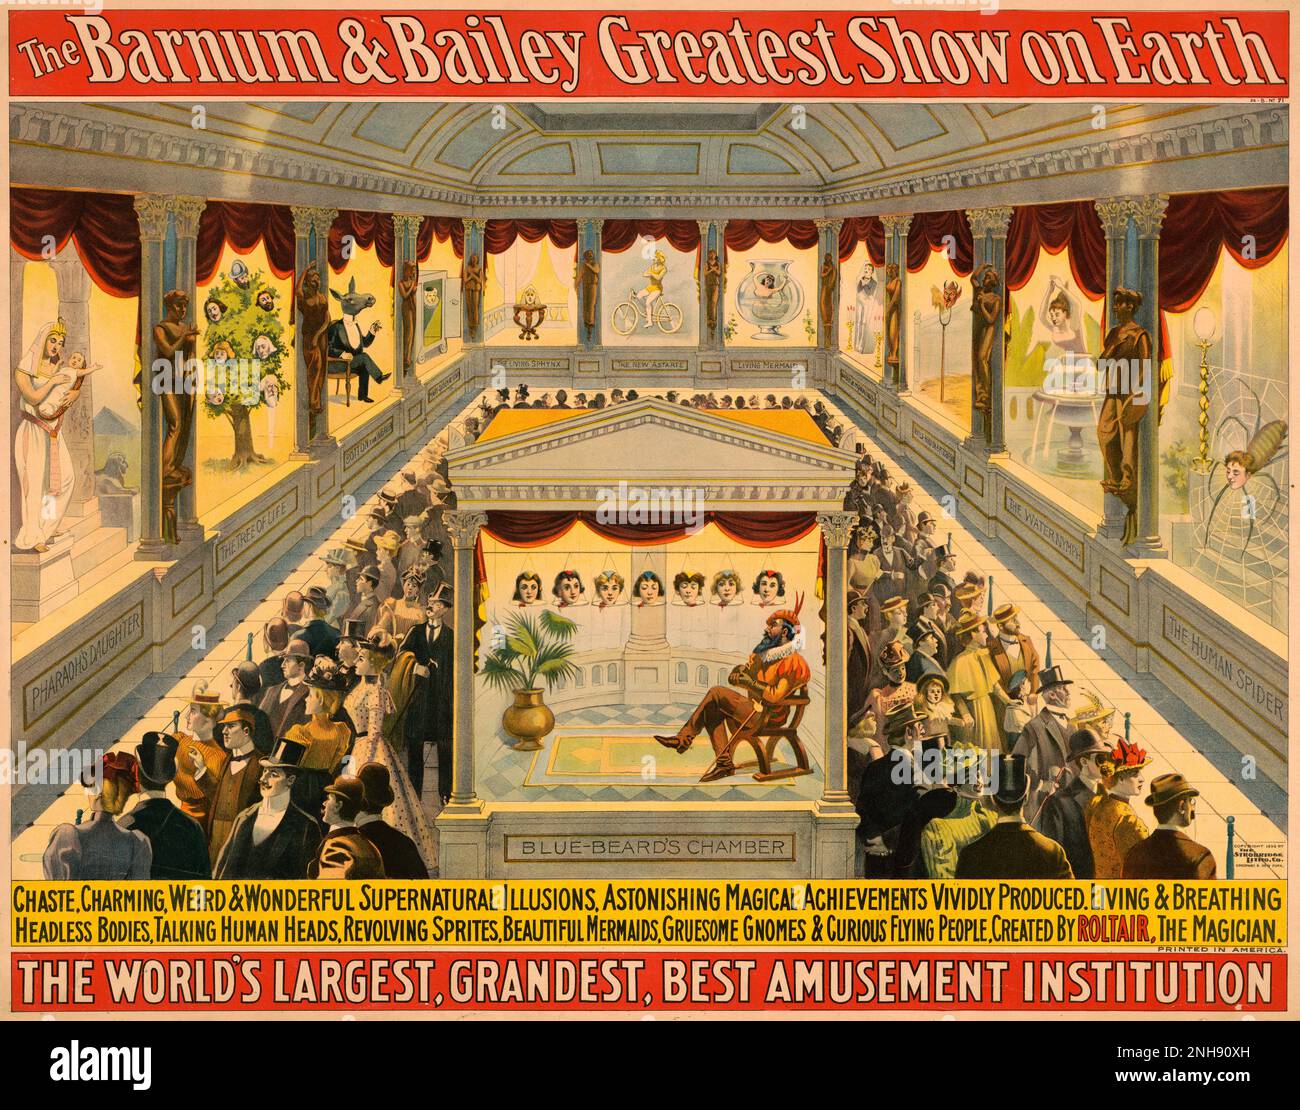 A poster for Barnum and Bailey's Greatest Show on Earth: 'Chaste, charming, weird & wonderful supernatural illusions ... created by Roltair, the magician,' c. 1898. People are shown viewing illusions in a hall, with Bluebeard and his chamber of wives' heads at center. Stock Photo